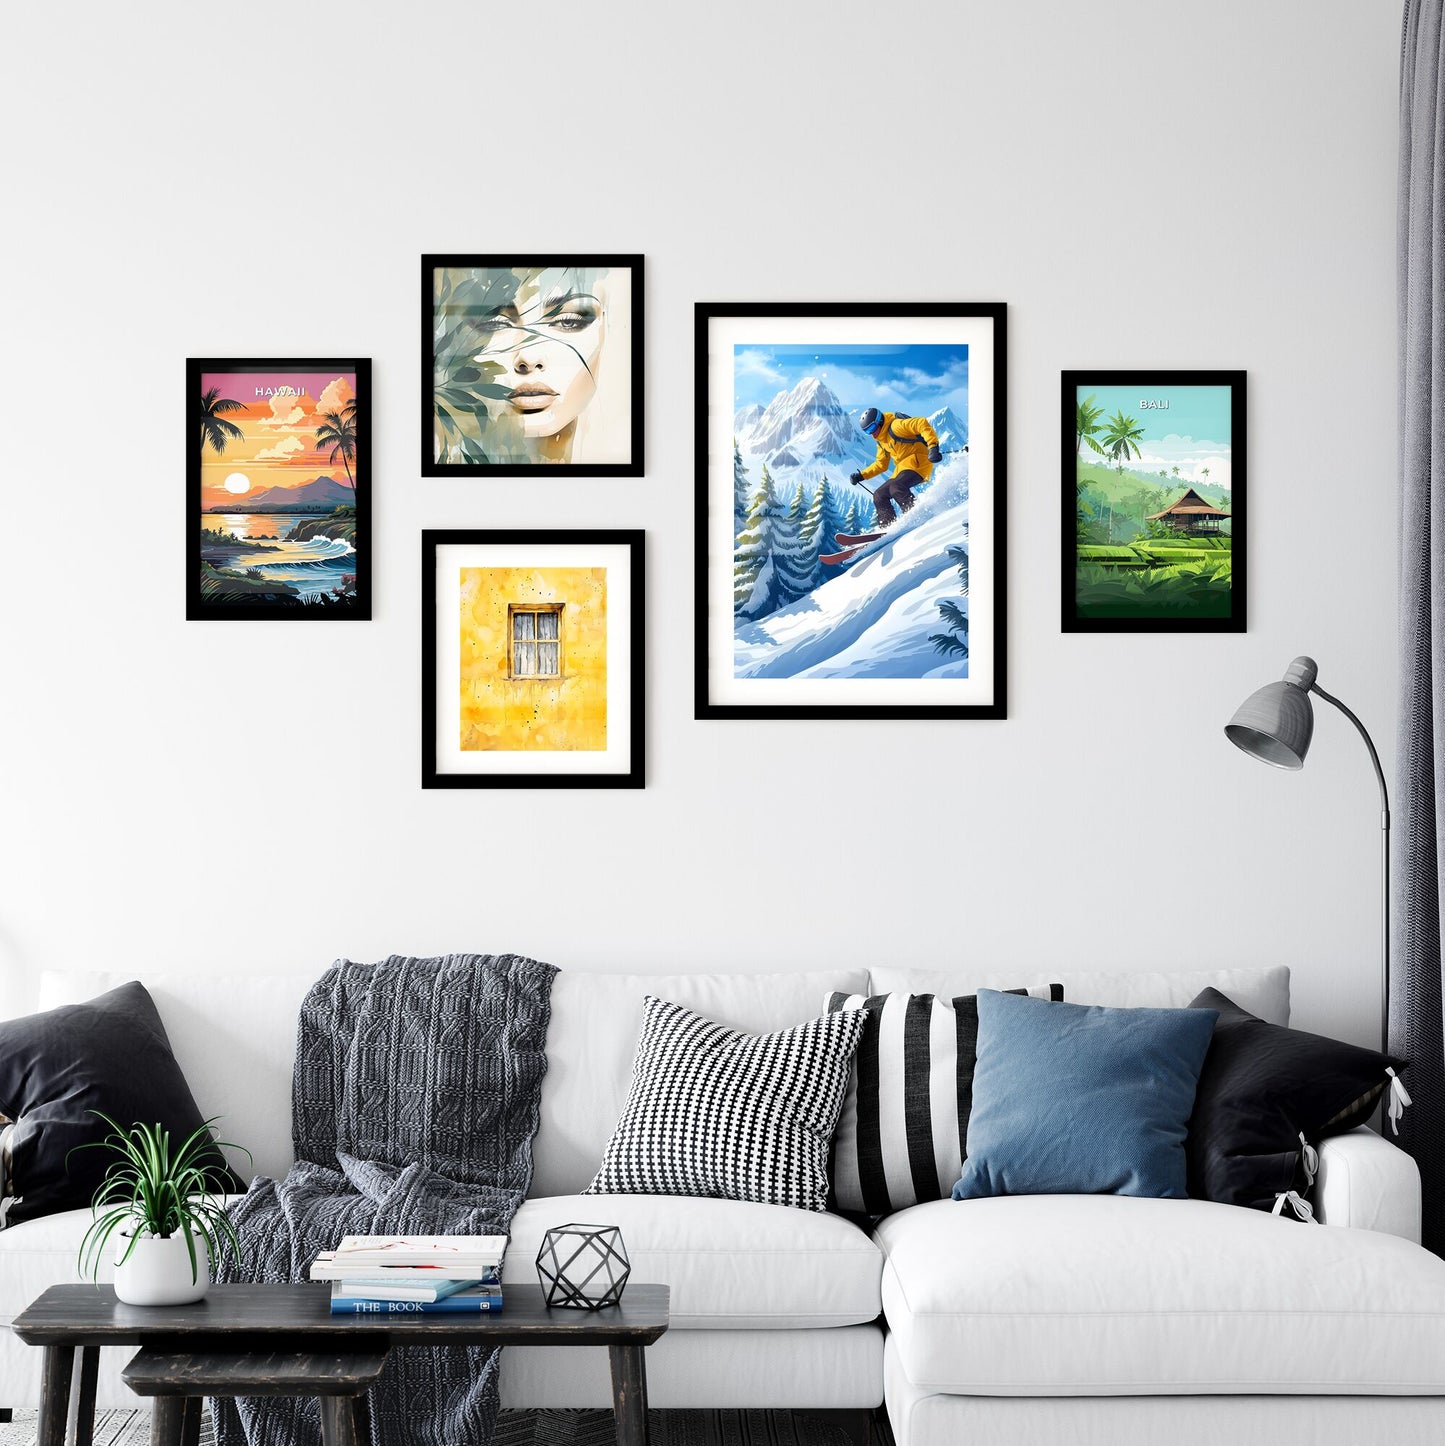 A skier wears snowboard gear and slides down a steep hill with snow - Art print of a person skiing down a snowy mountain Default Title